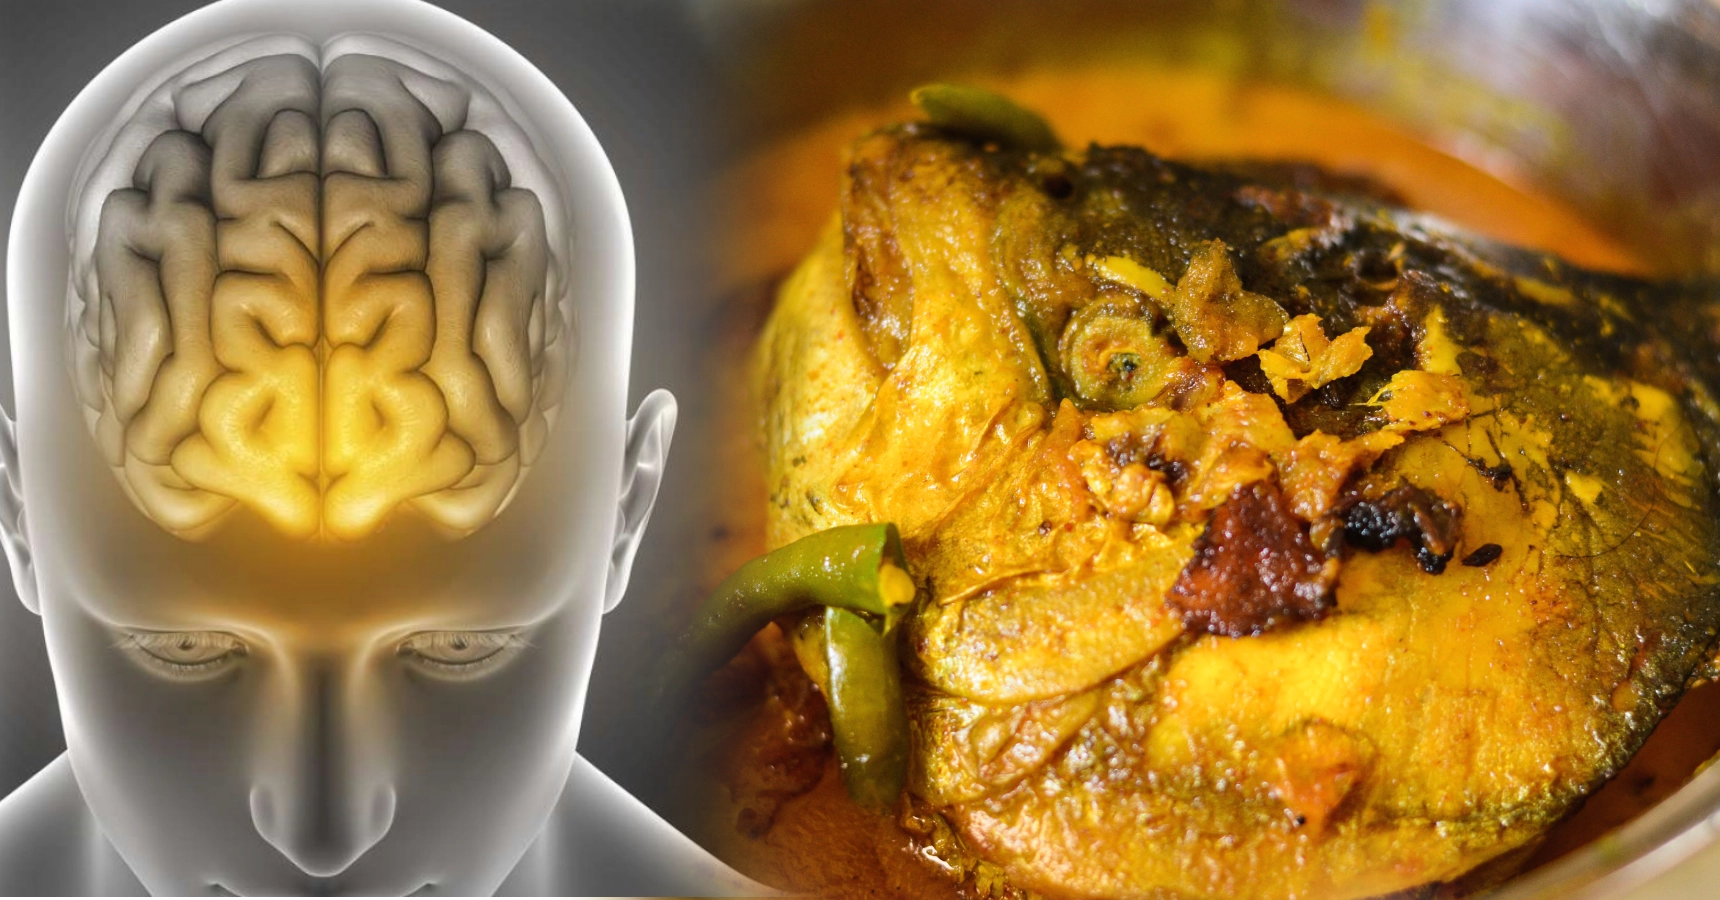 eat Fish head then your intelligent and brain health will increase